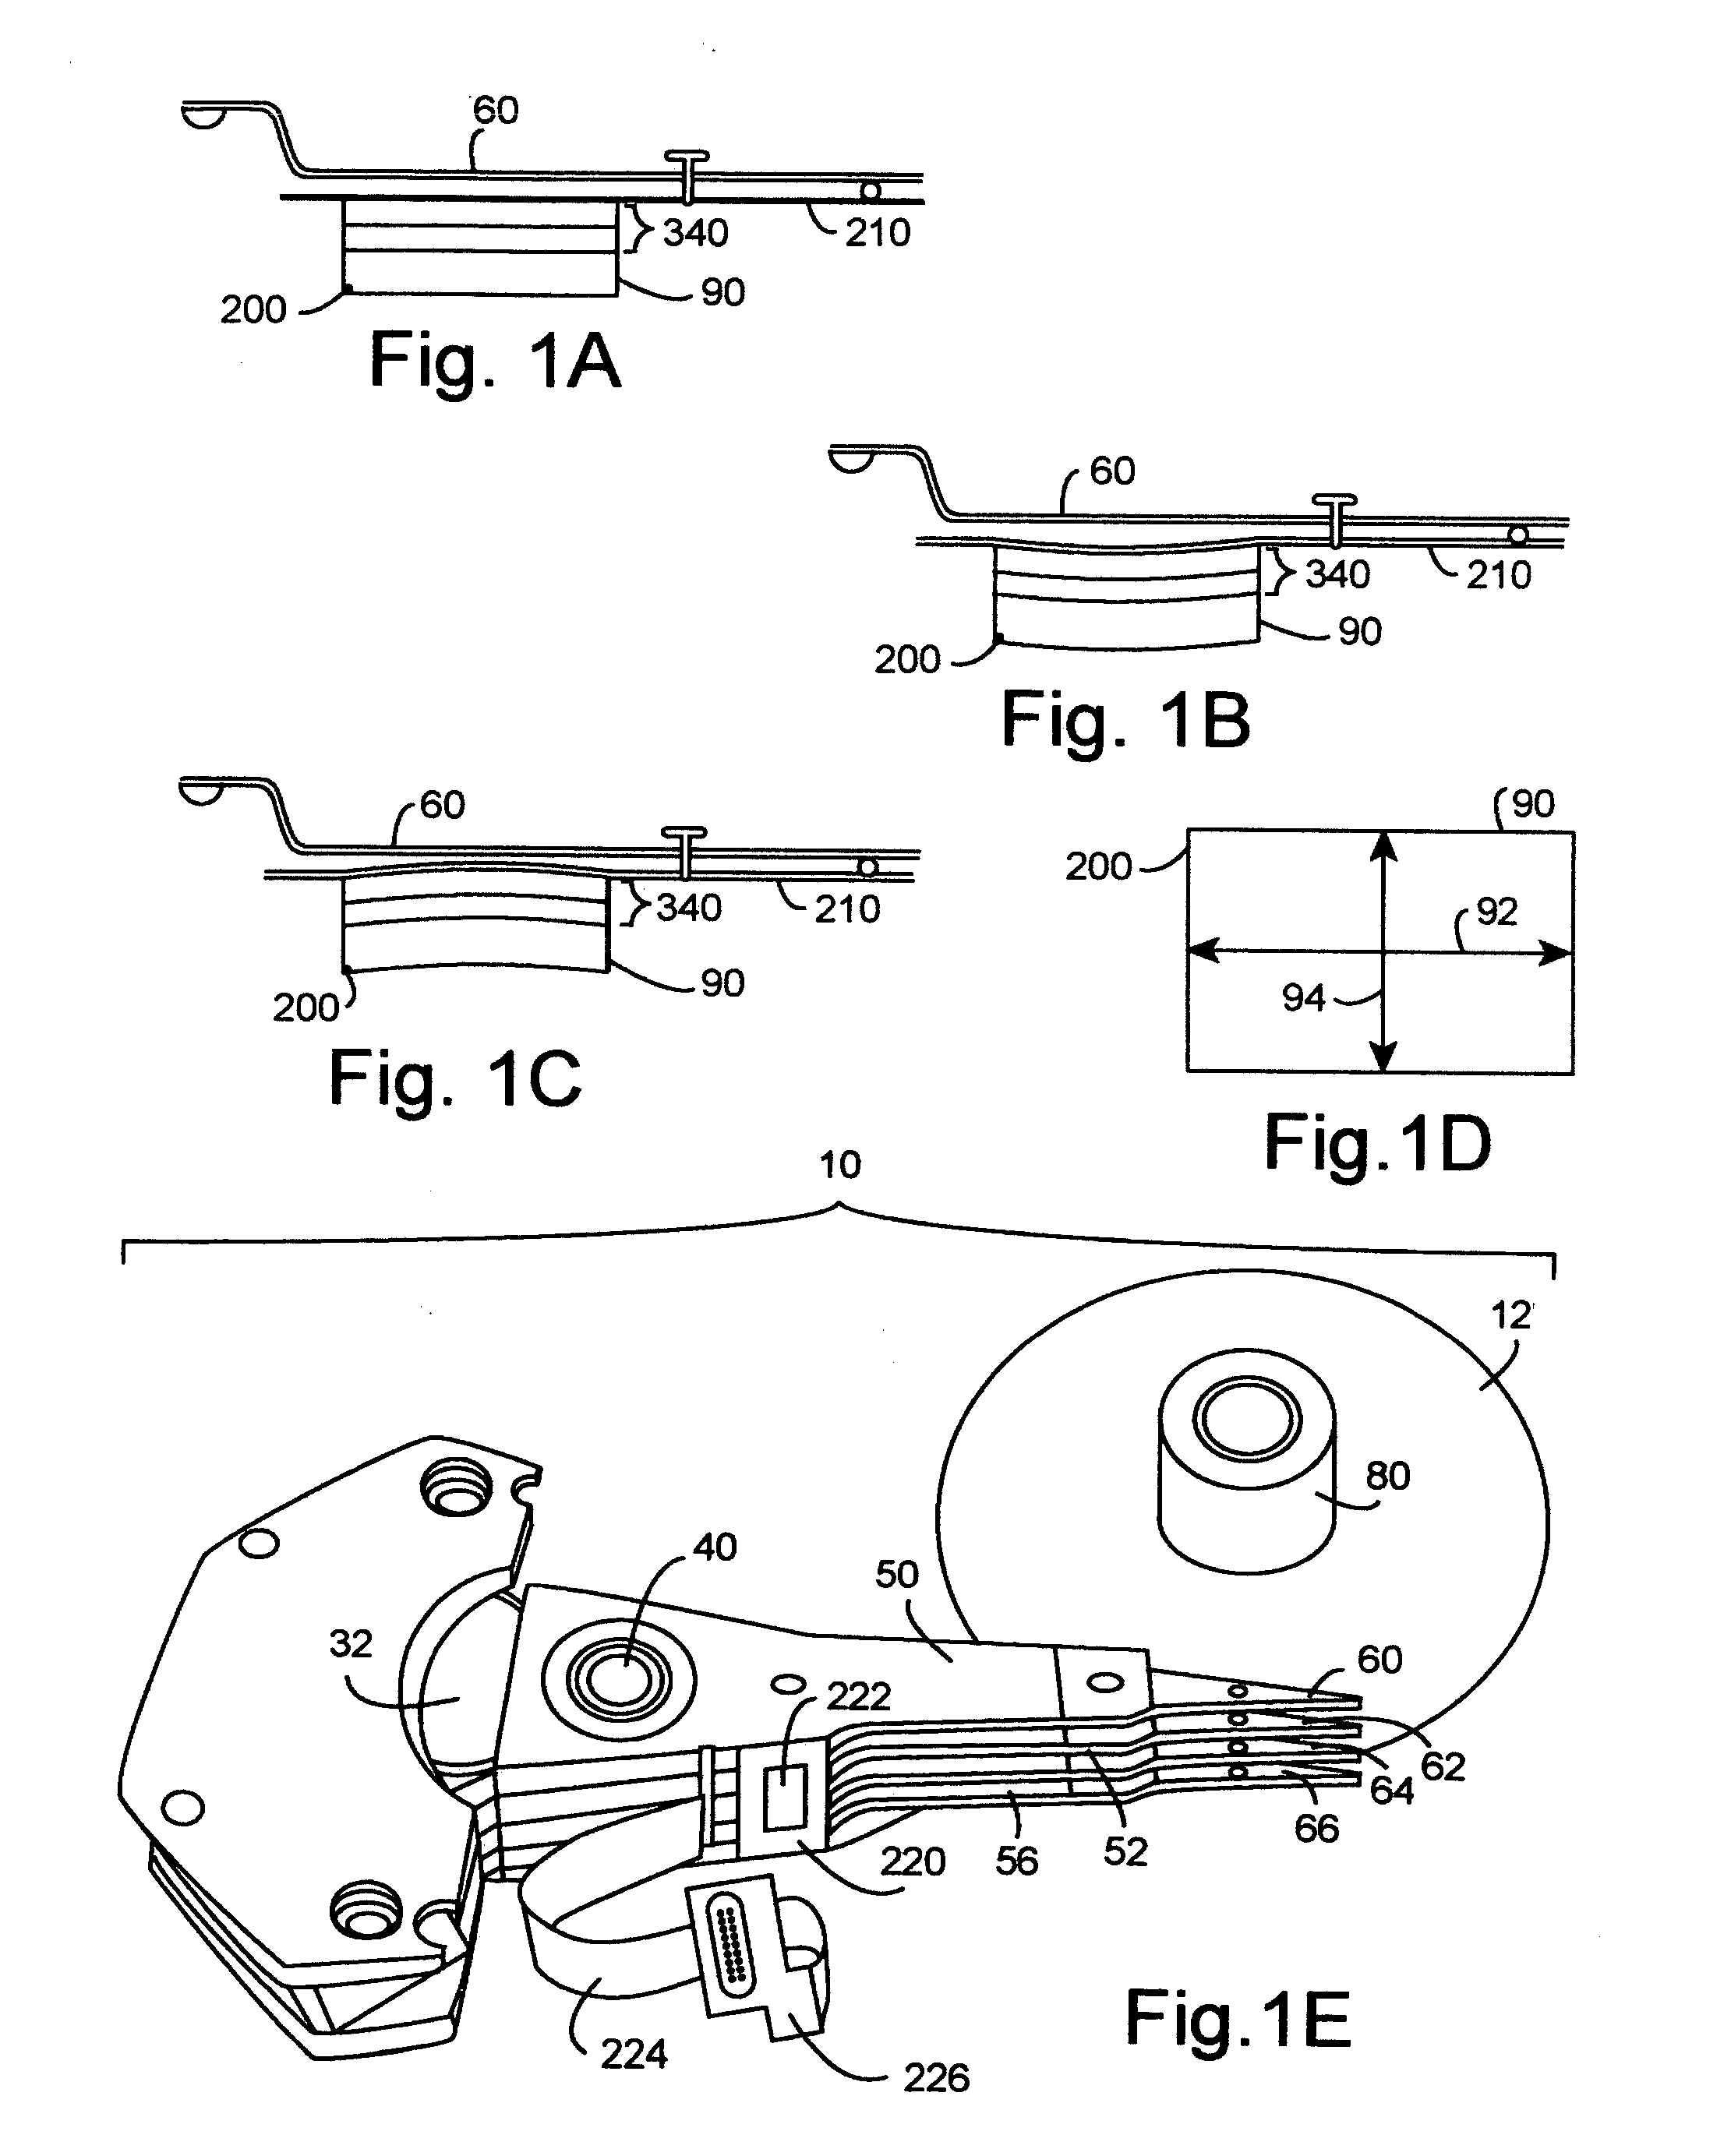 Head gimbal assemblies for very low flying height heads with optional micro-actuators in a hard disk drive